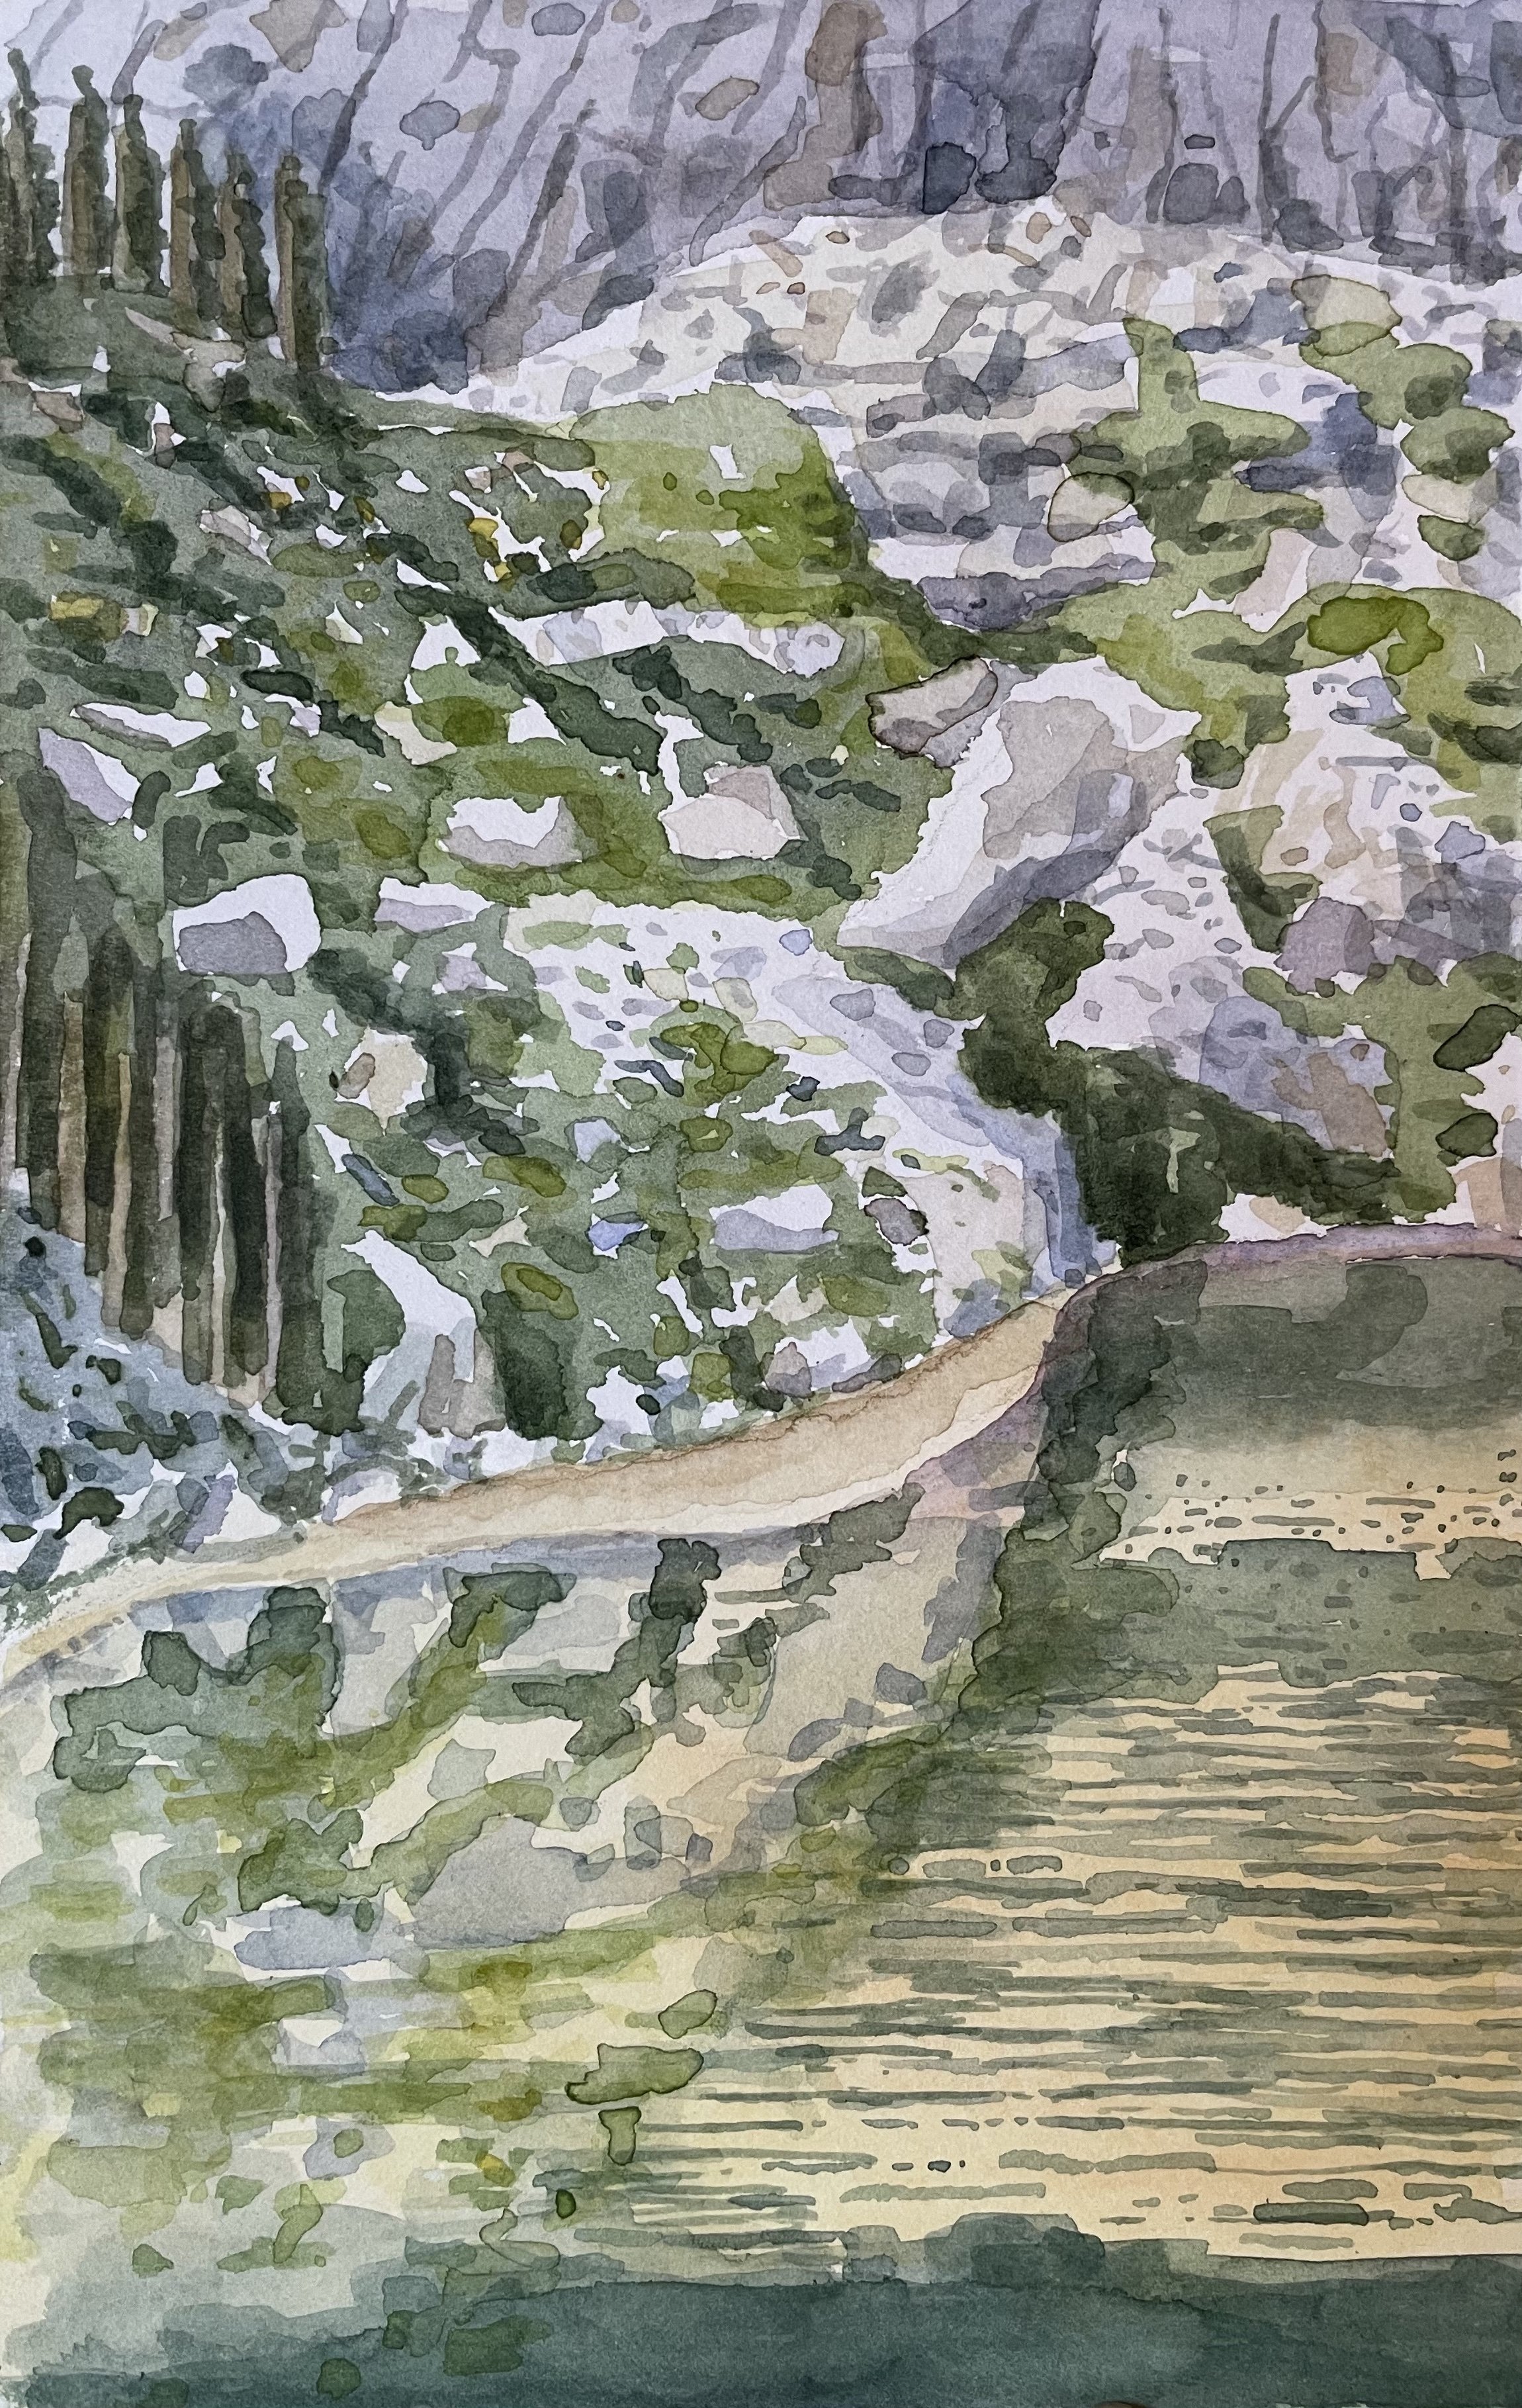 Franklin Lakes 2, 7 x 4.5 inches, Watercolor, 2021